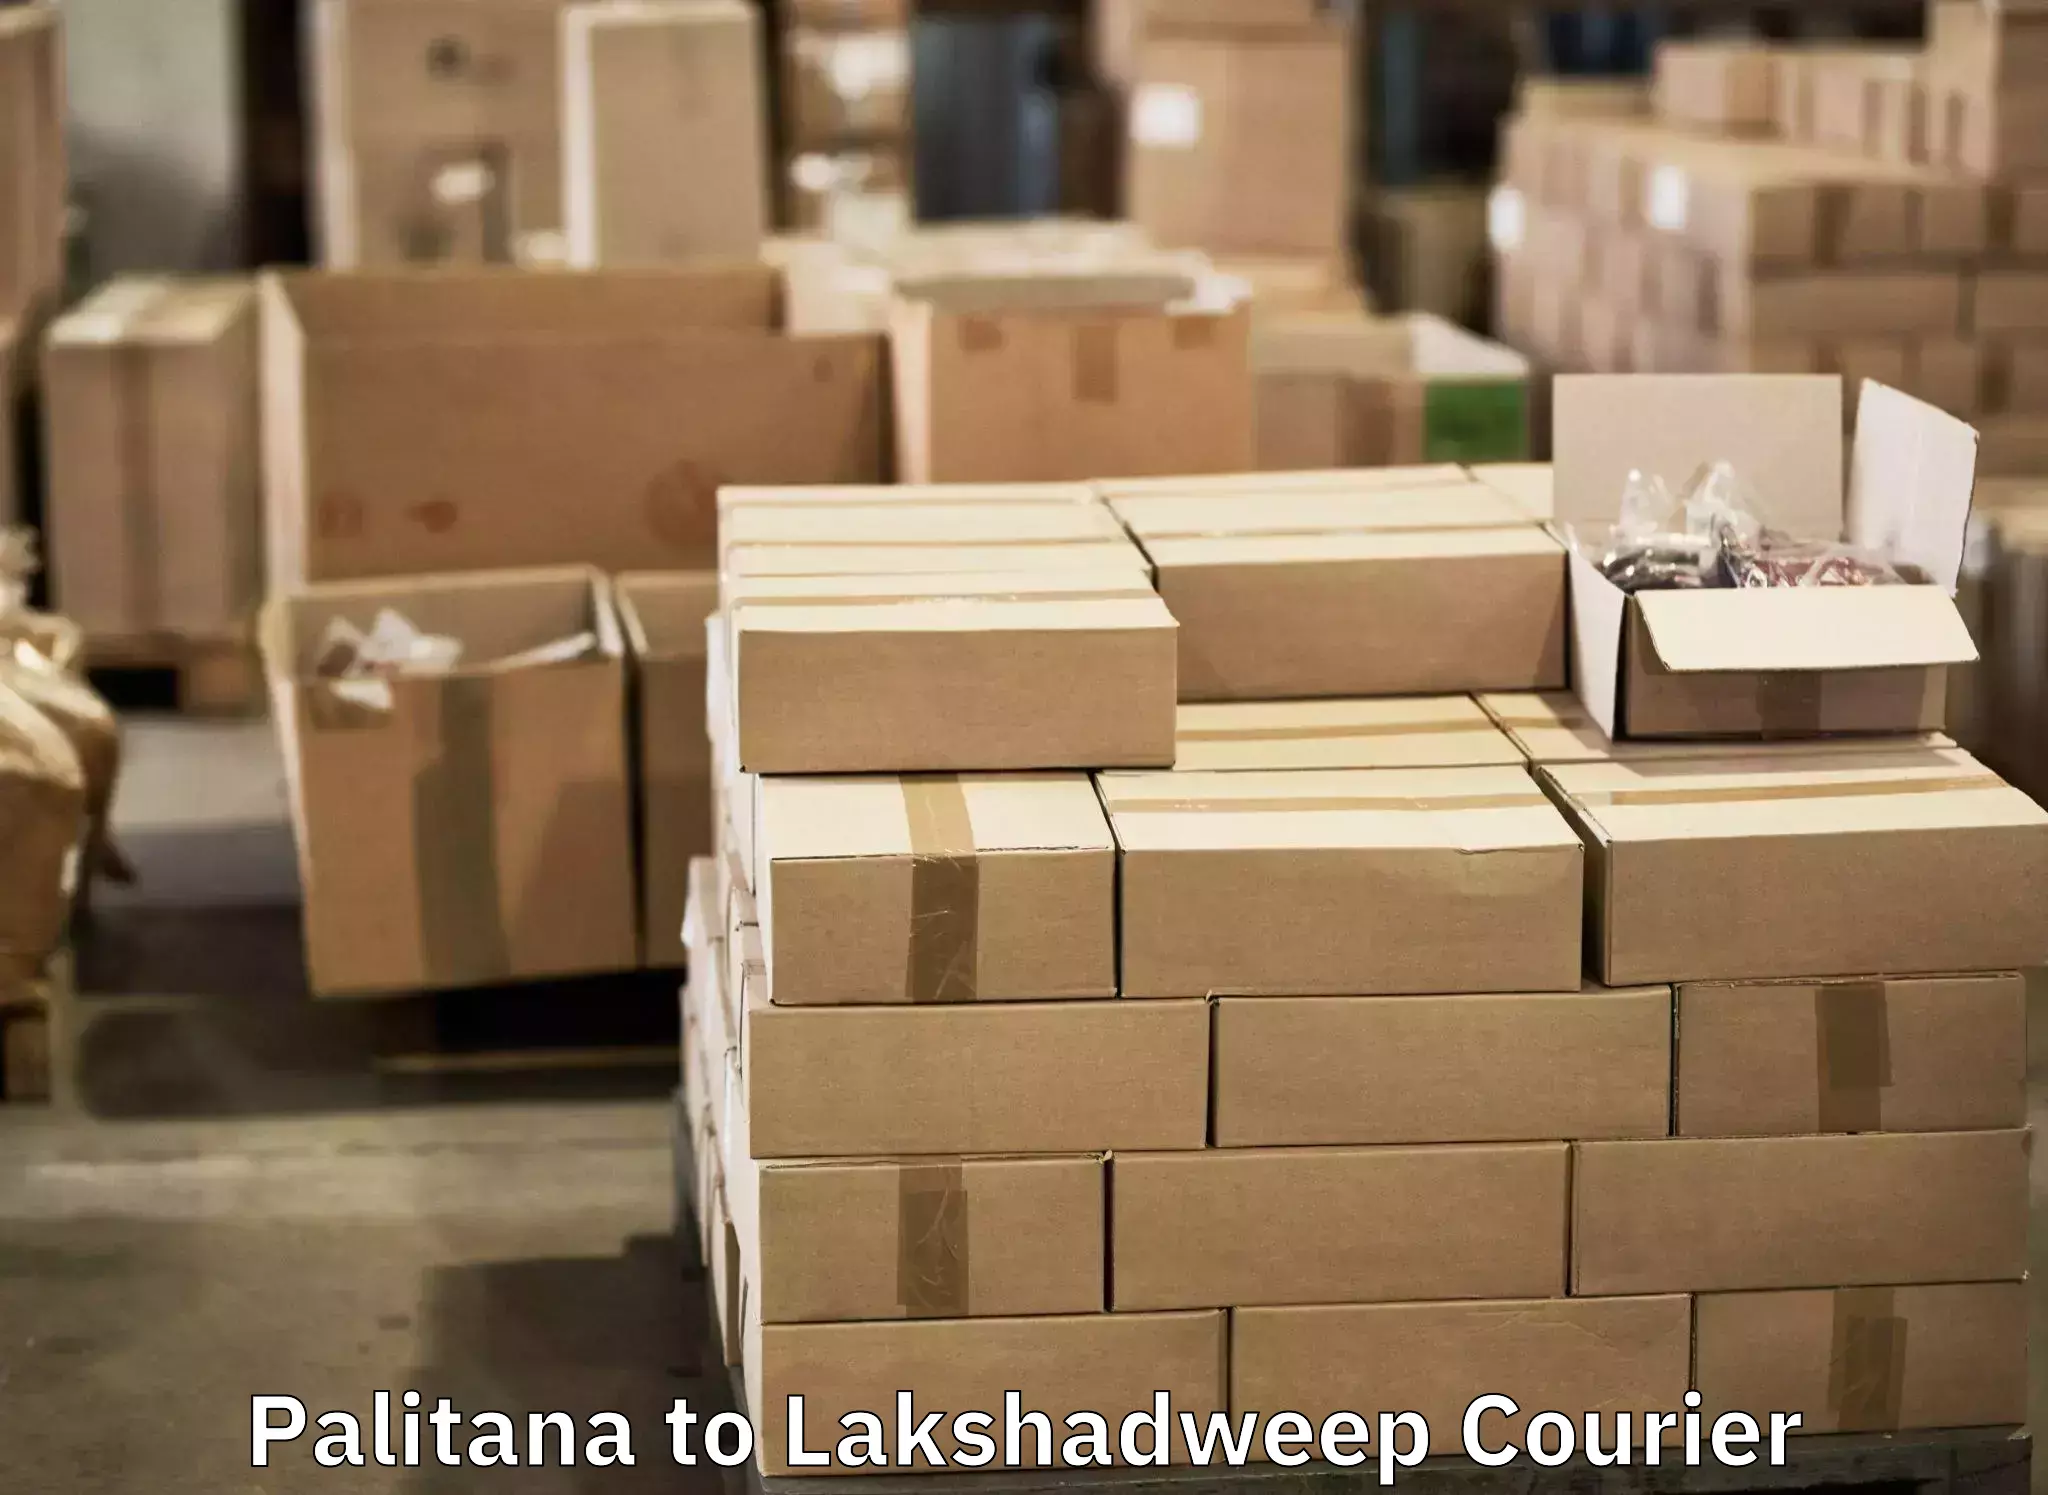 Instant baggage transport quote Palitana to Lakshadweep